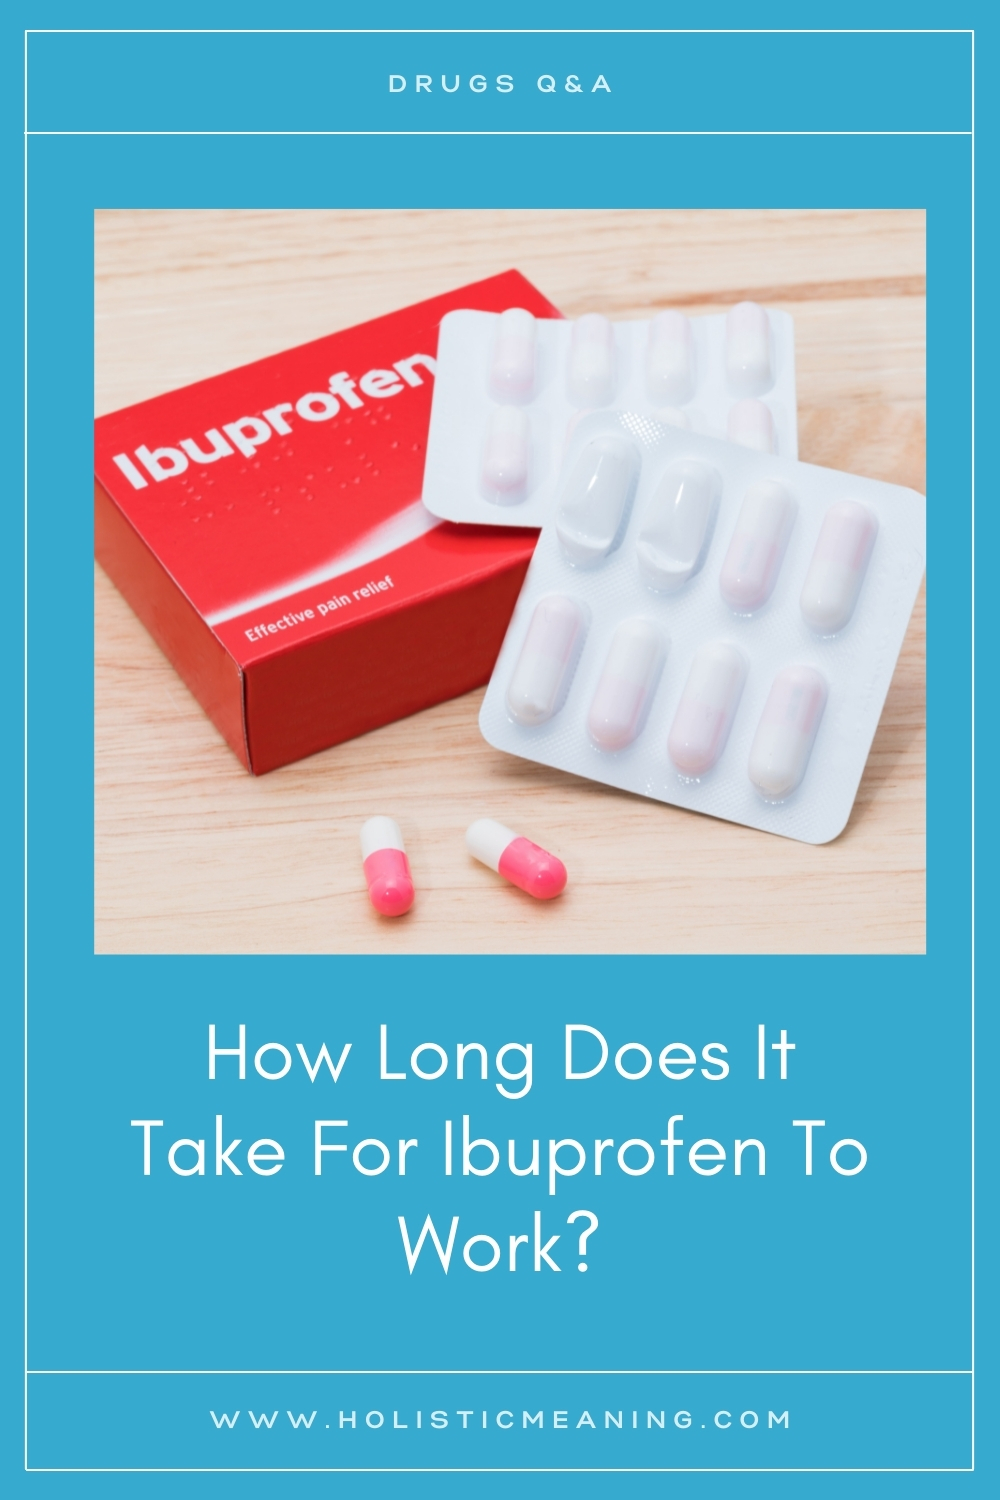 How Long Does It Take For Ibuprofen To Work? Holistic